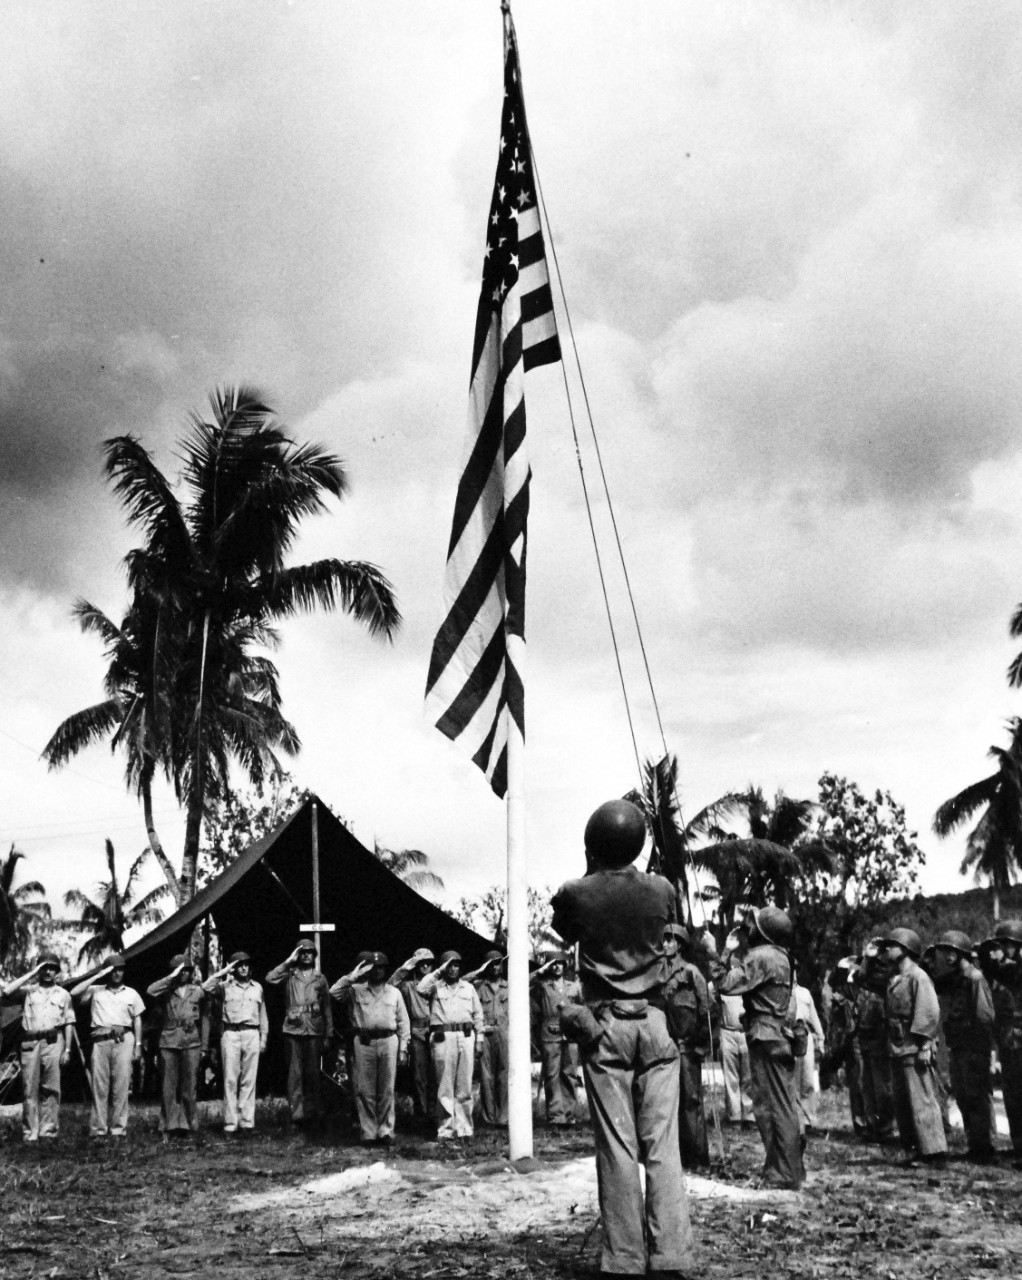 80-G-239310:    Invasion of Guam, July 21-August 10, 1944     Rear Admiral Richard L. Conolly, USN, Commander of Naval Amphibious Operations for the Guam invasion and on his left, Marine Major General Roy S. Geiger, 3rd Amphibious Corps, Commanding General, saluting the first American flag officially raised on Guam, July 27, 1944.  The photograph was released on  August 5, 1944.    Official U.S. Navy Photograph, now in the collections of the National Archives.  (2017/03/07).